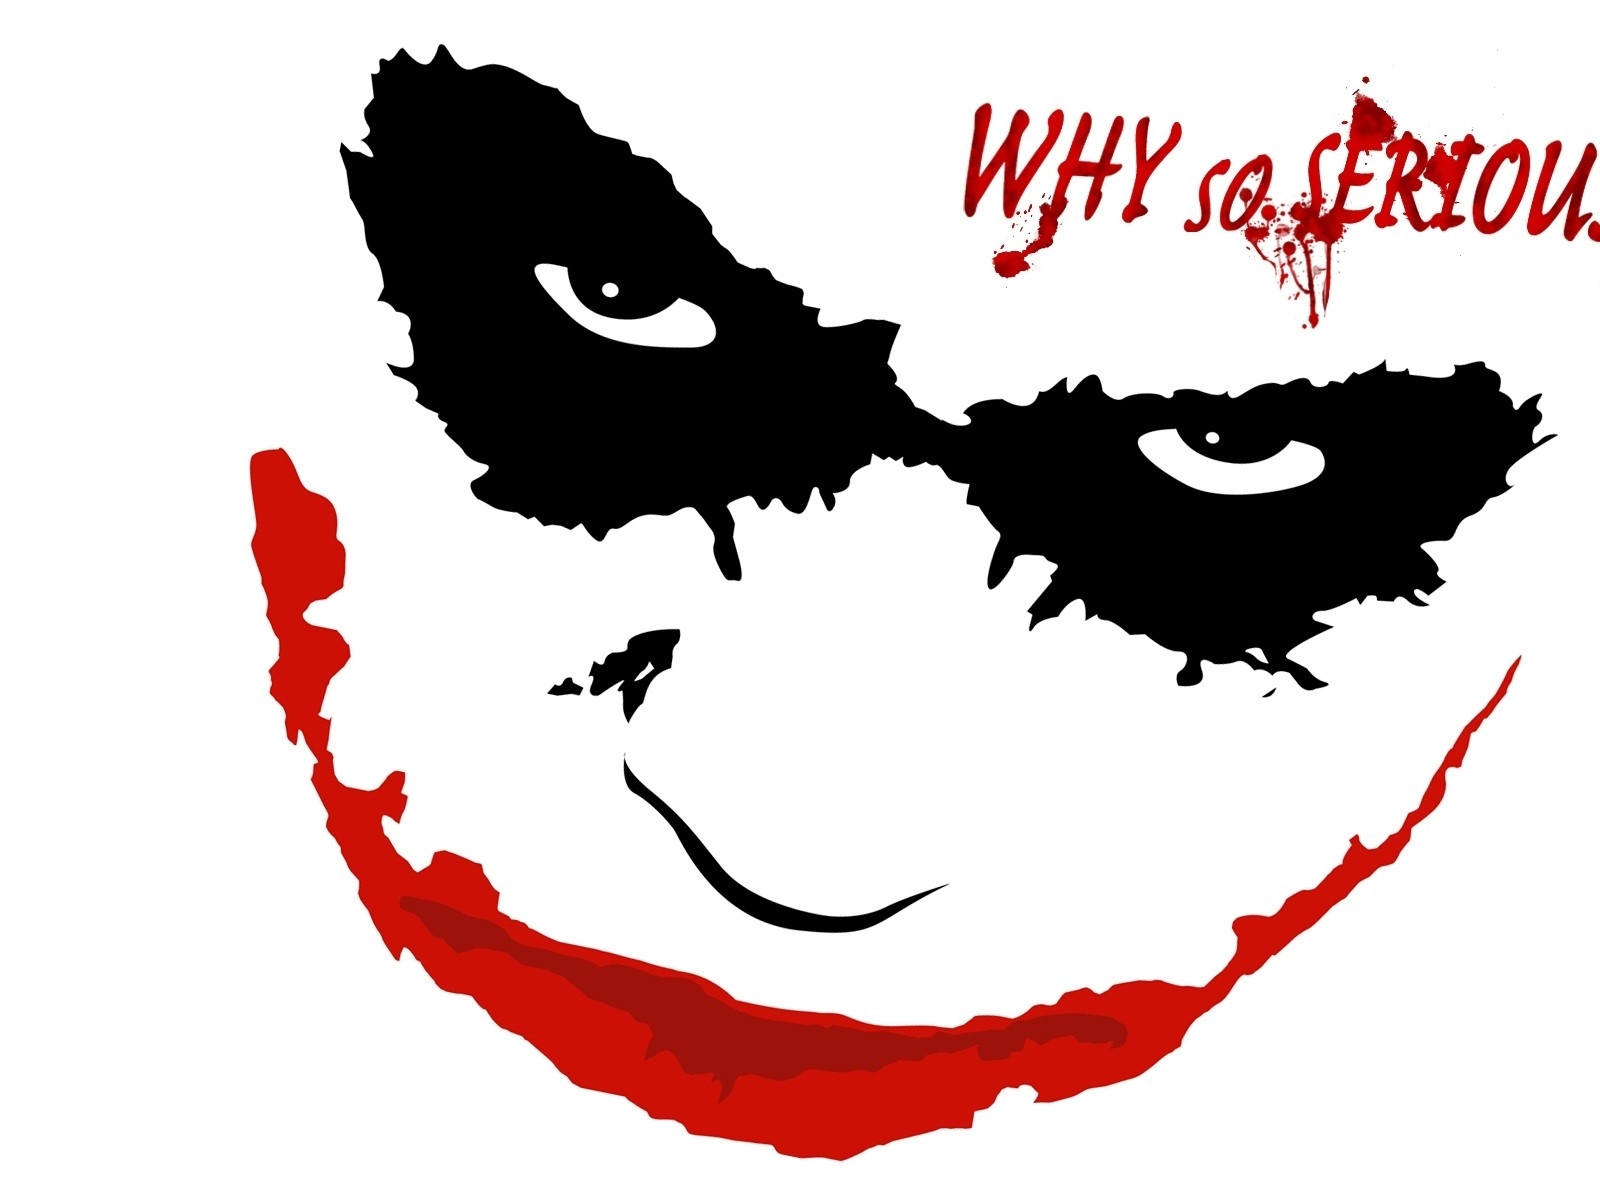 why so serious wallpaper 1080p